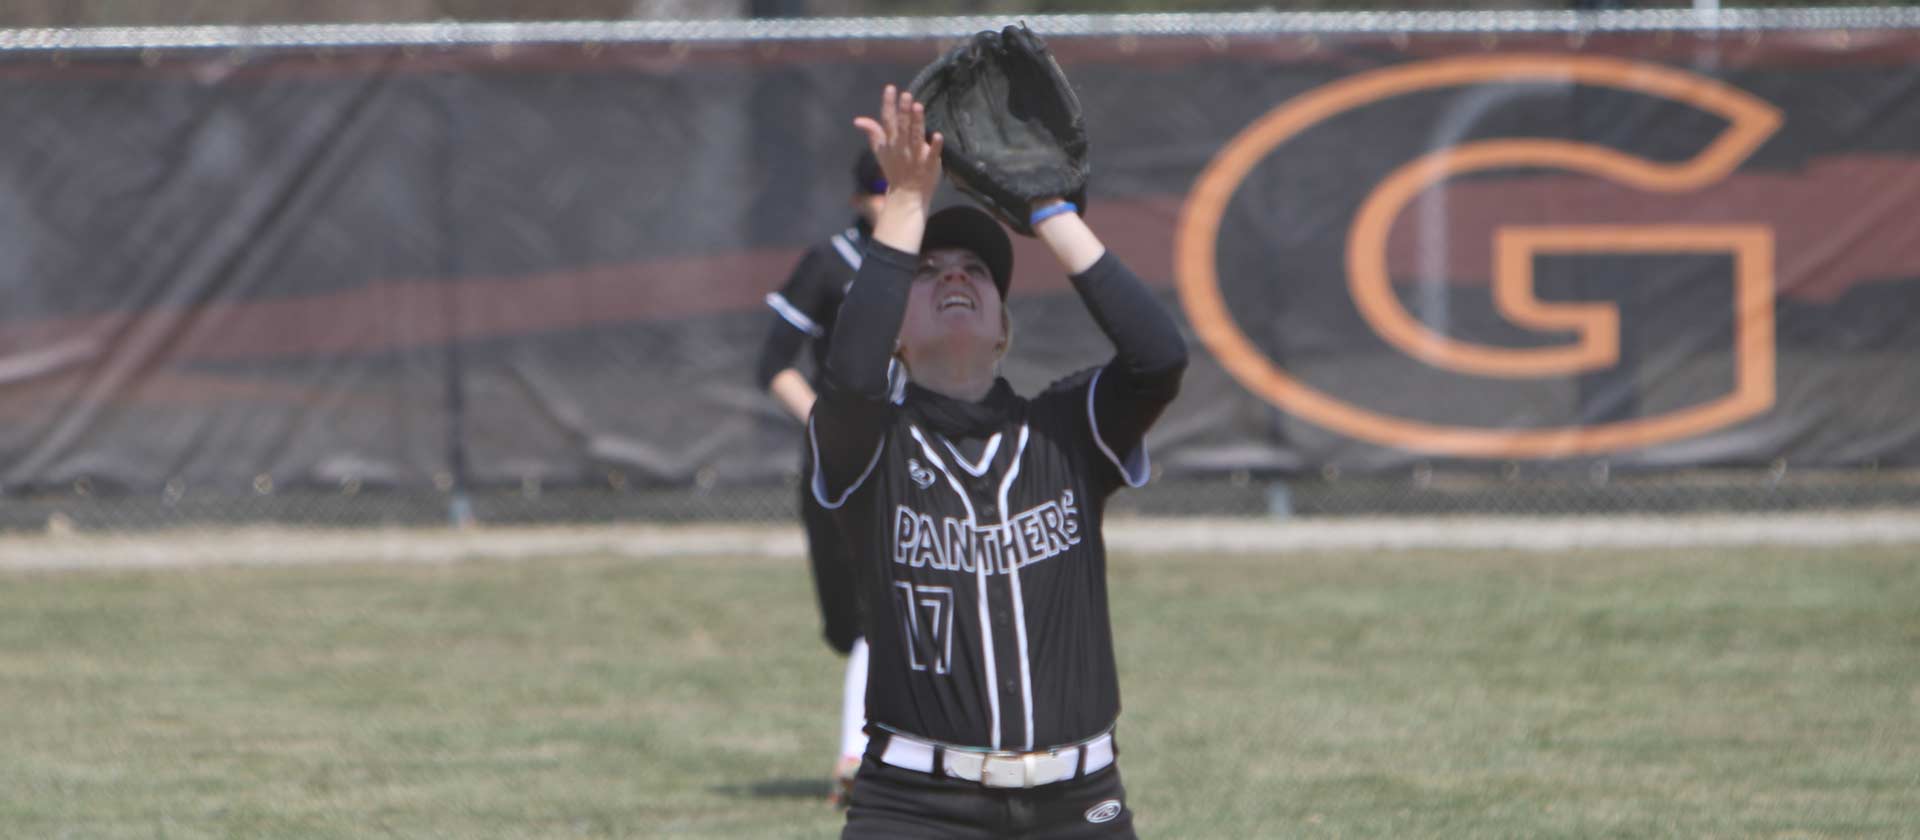 Softball takes second of two games against Simpson Saturday